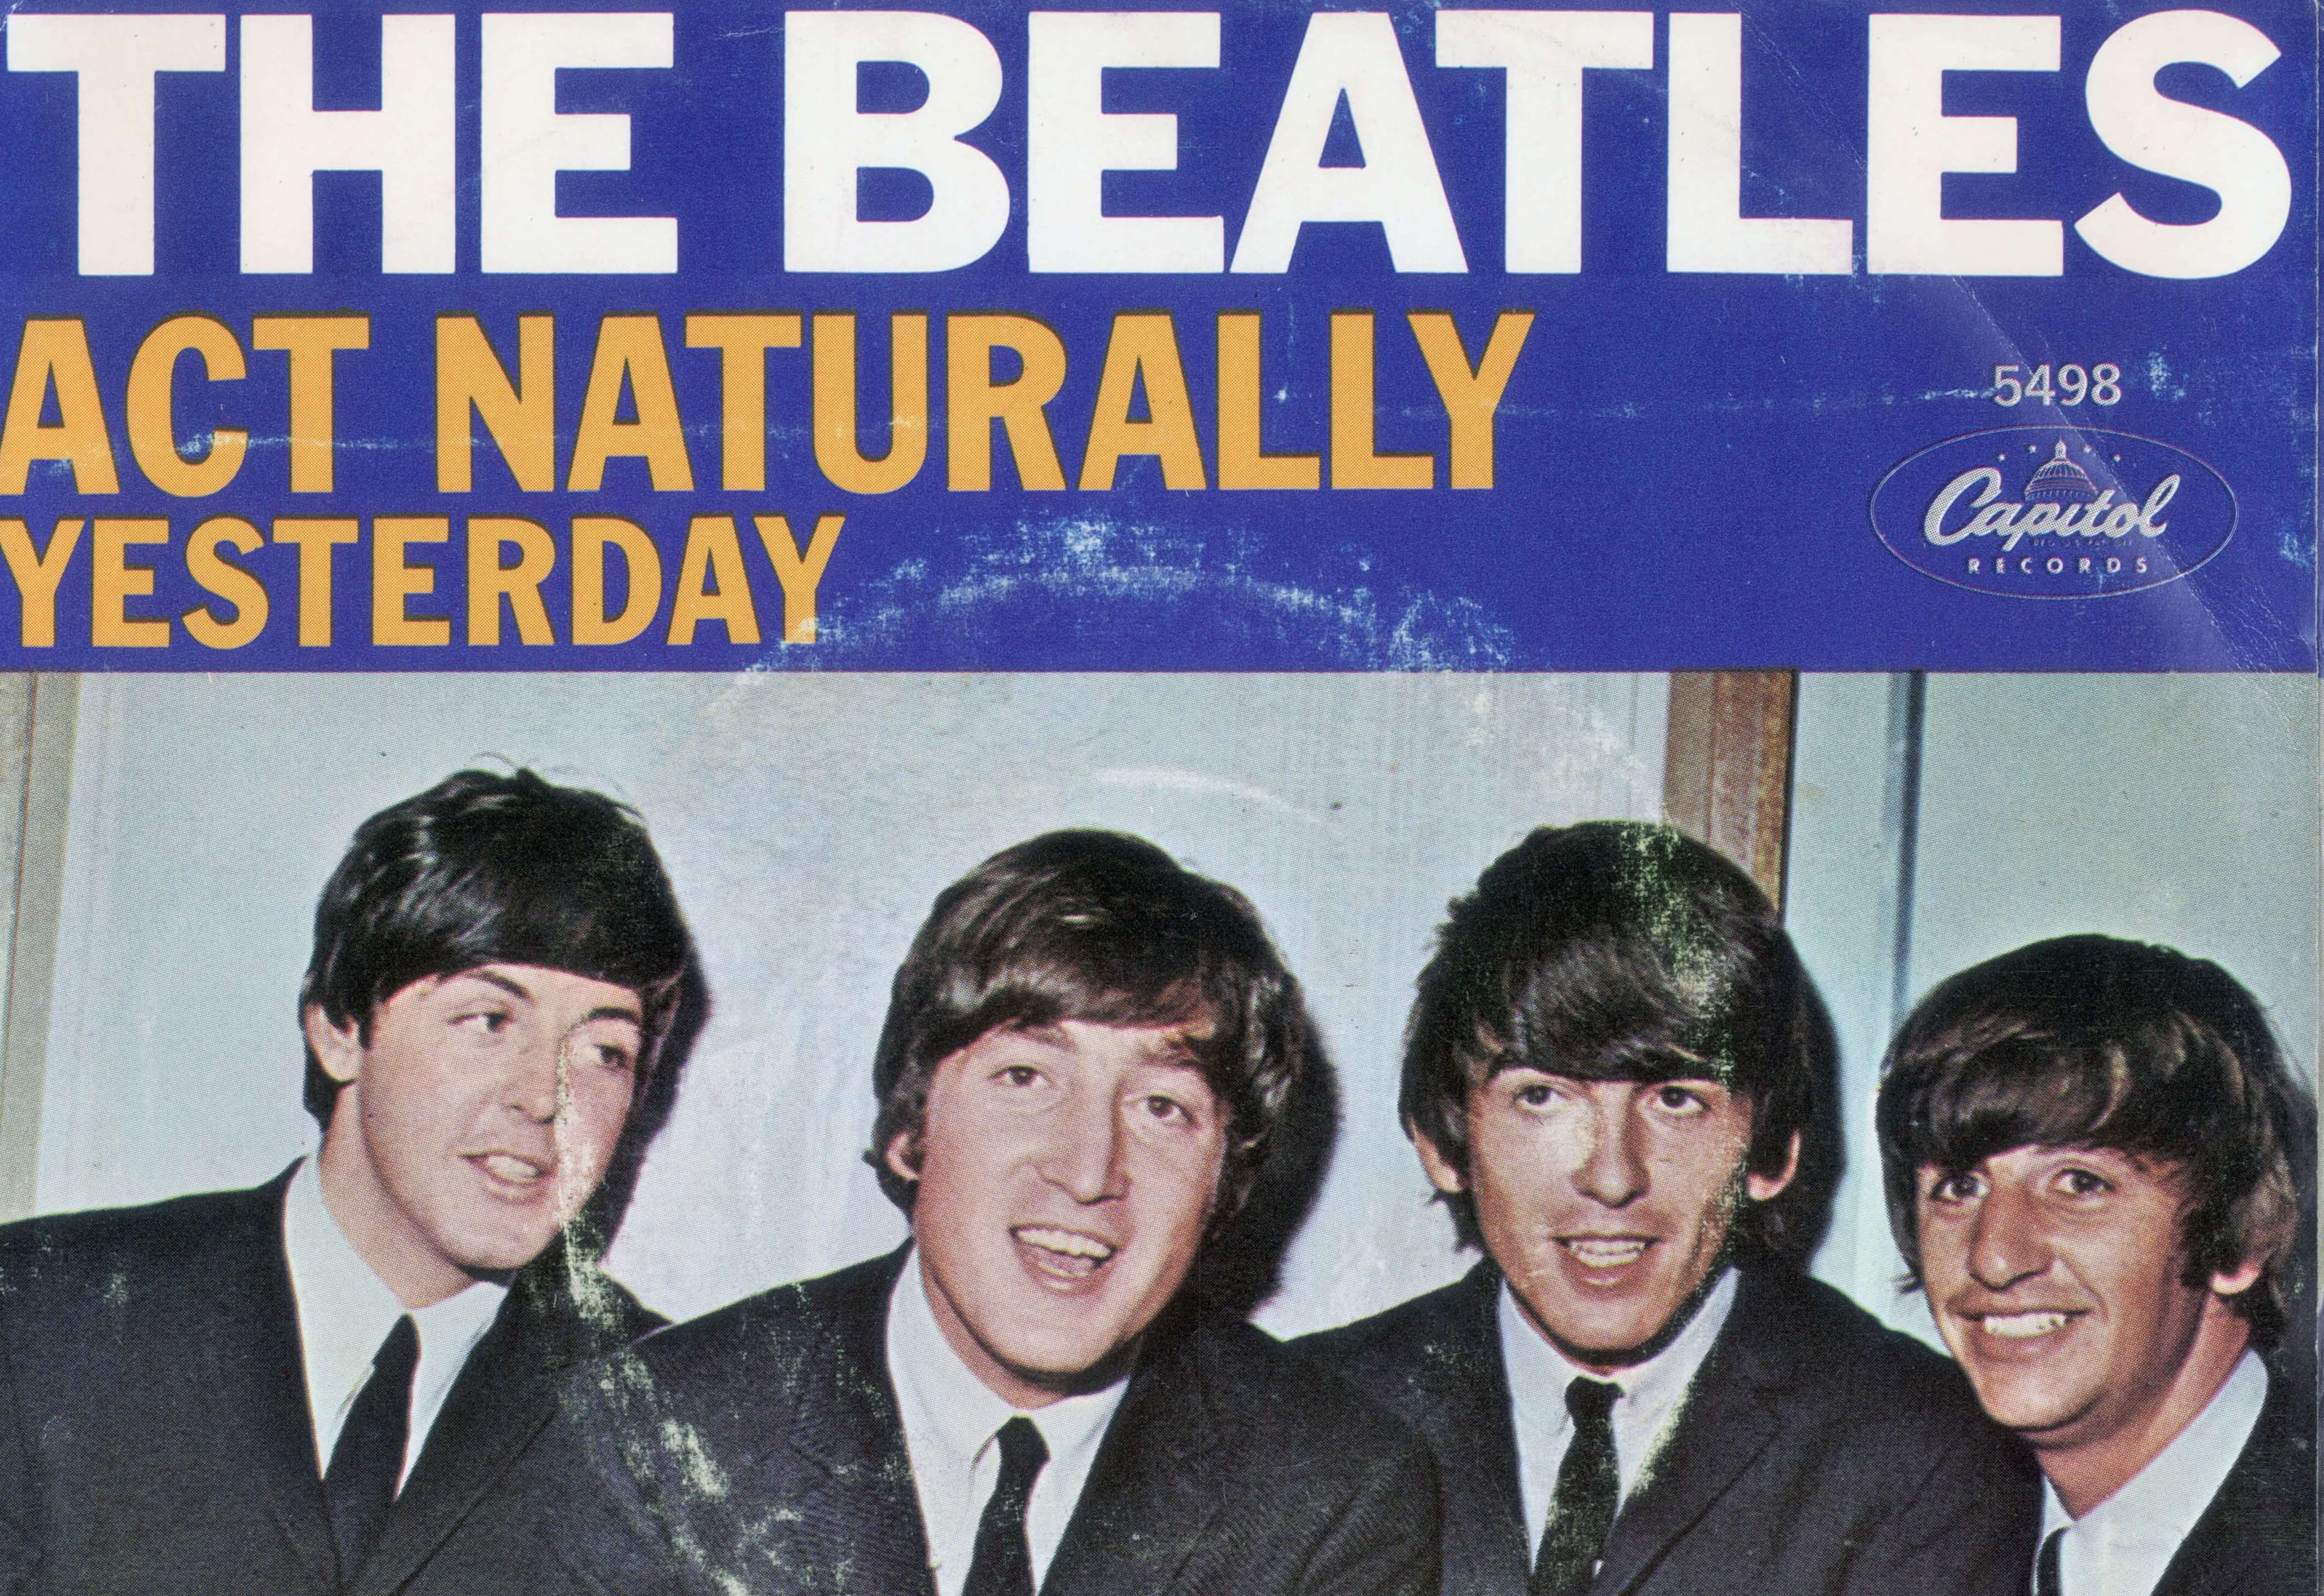 A vinyl of The Beatles' "Yesterday" with "Act Naturally" as the B-side